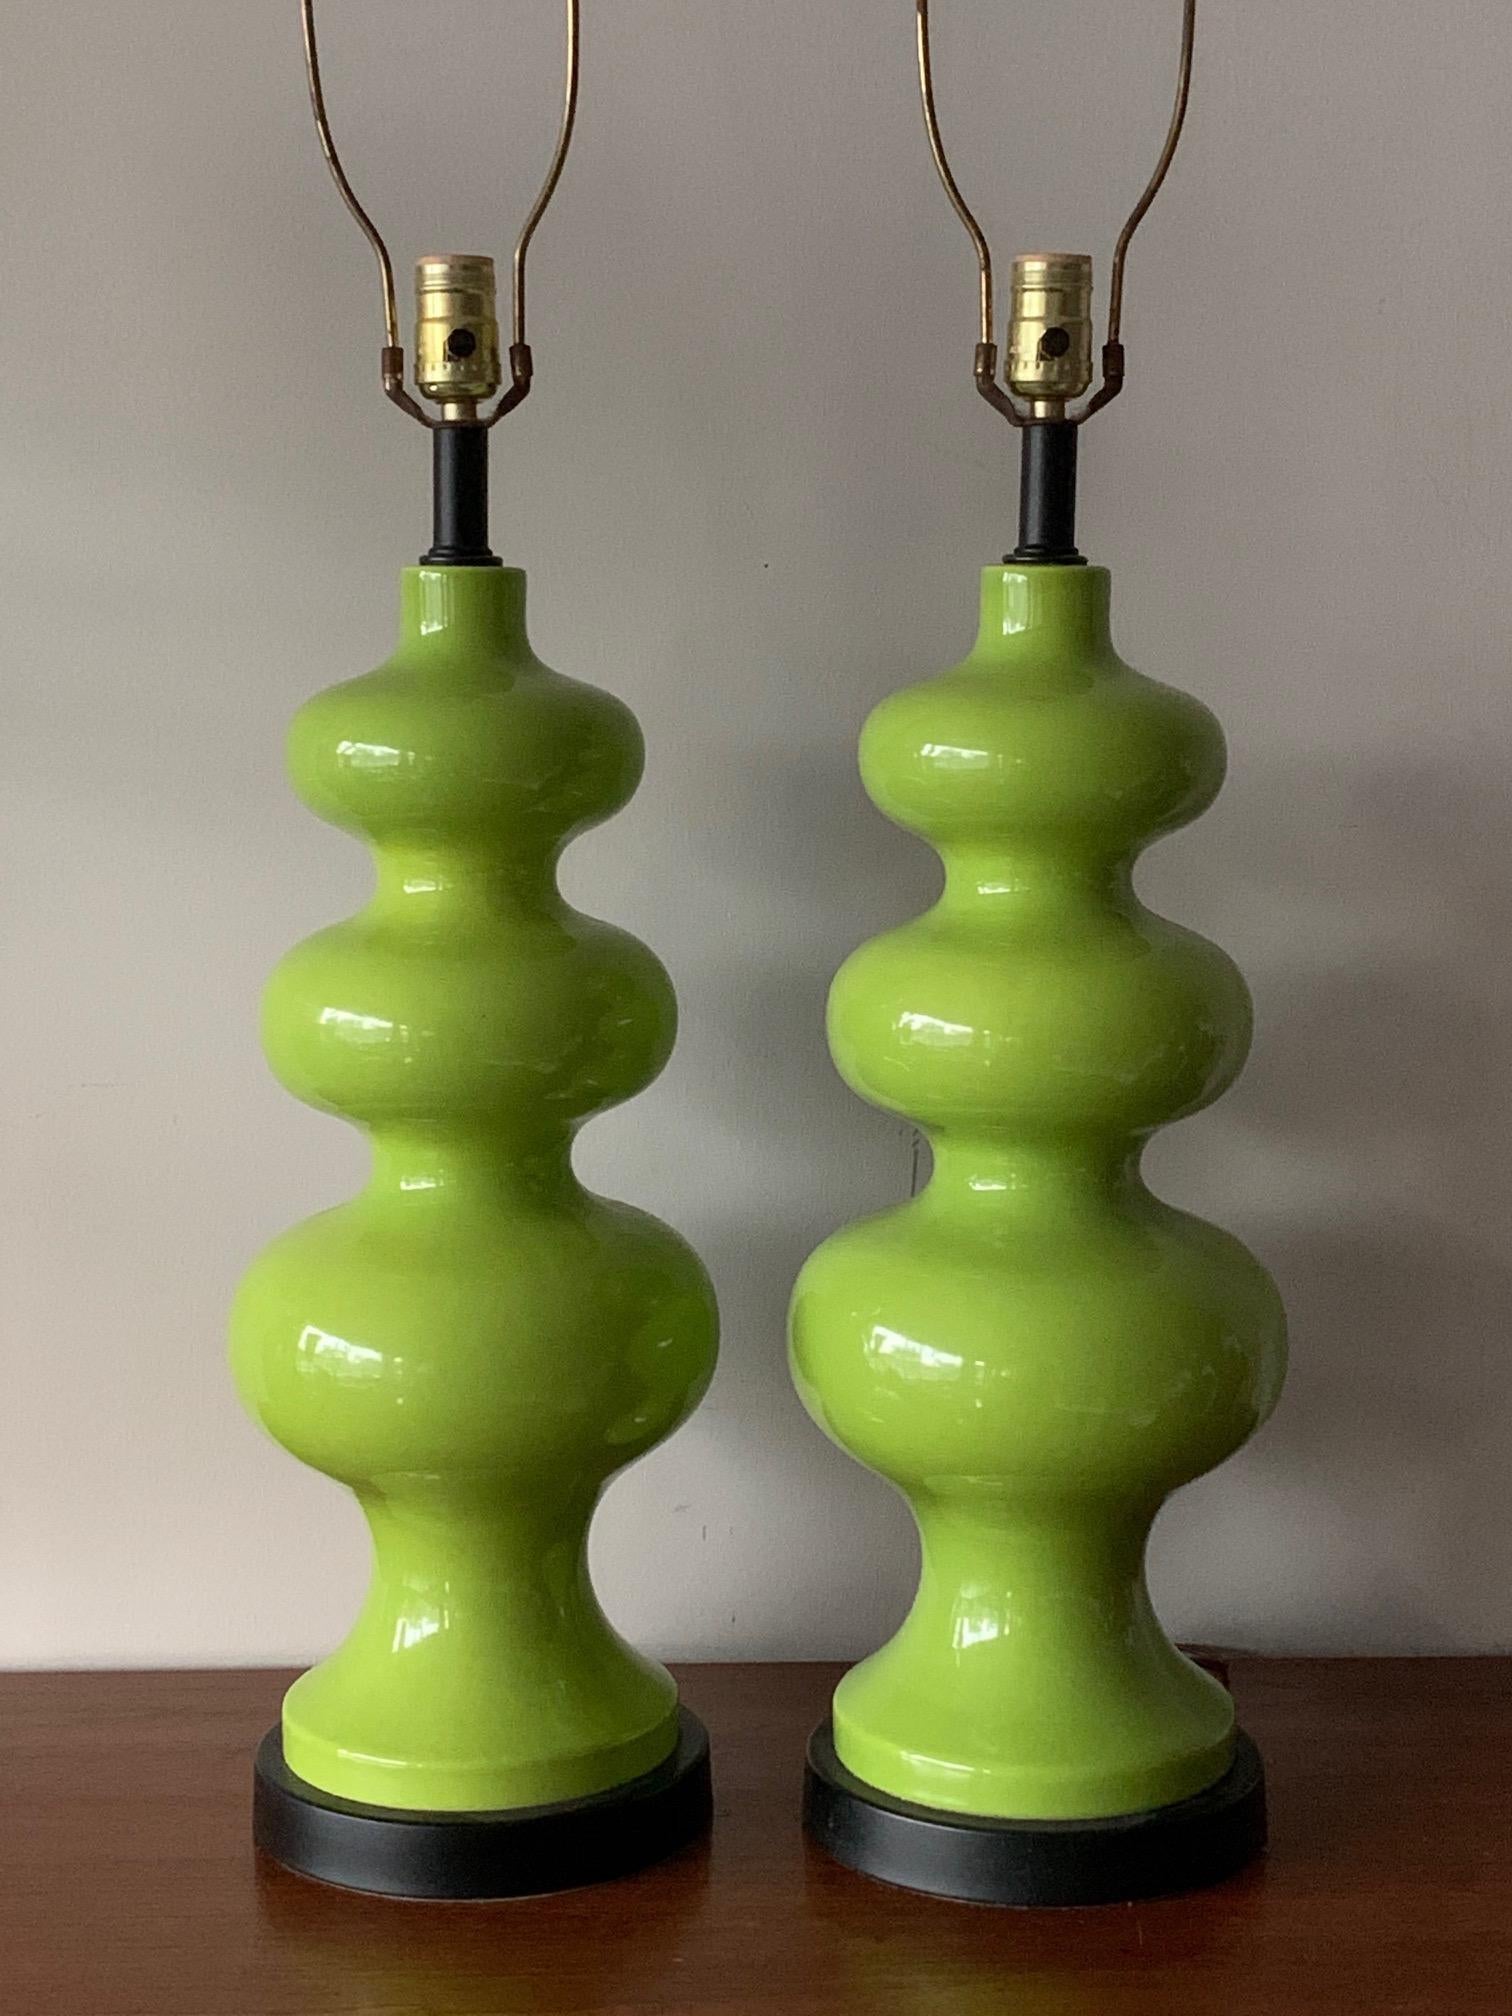 A pair of 1970s sculptural lamps-amazing mint green color, all original with matching green shades.
These are tall and very impressive-a rare find! Total height with shades 41.5